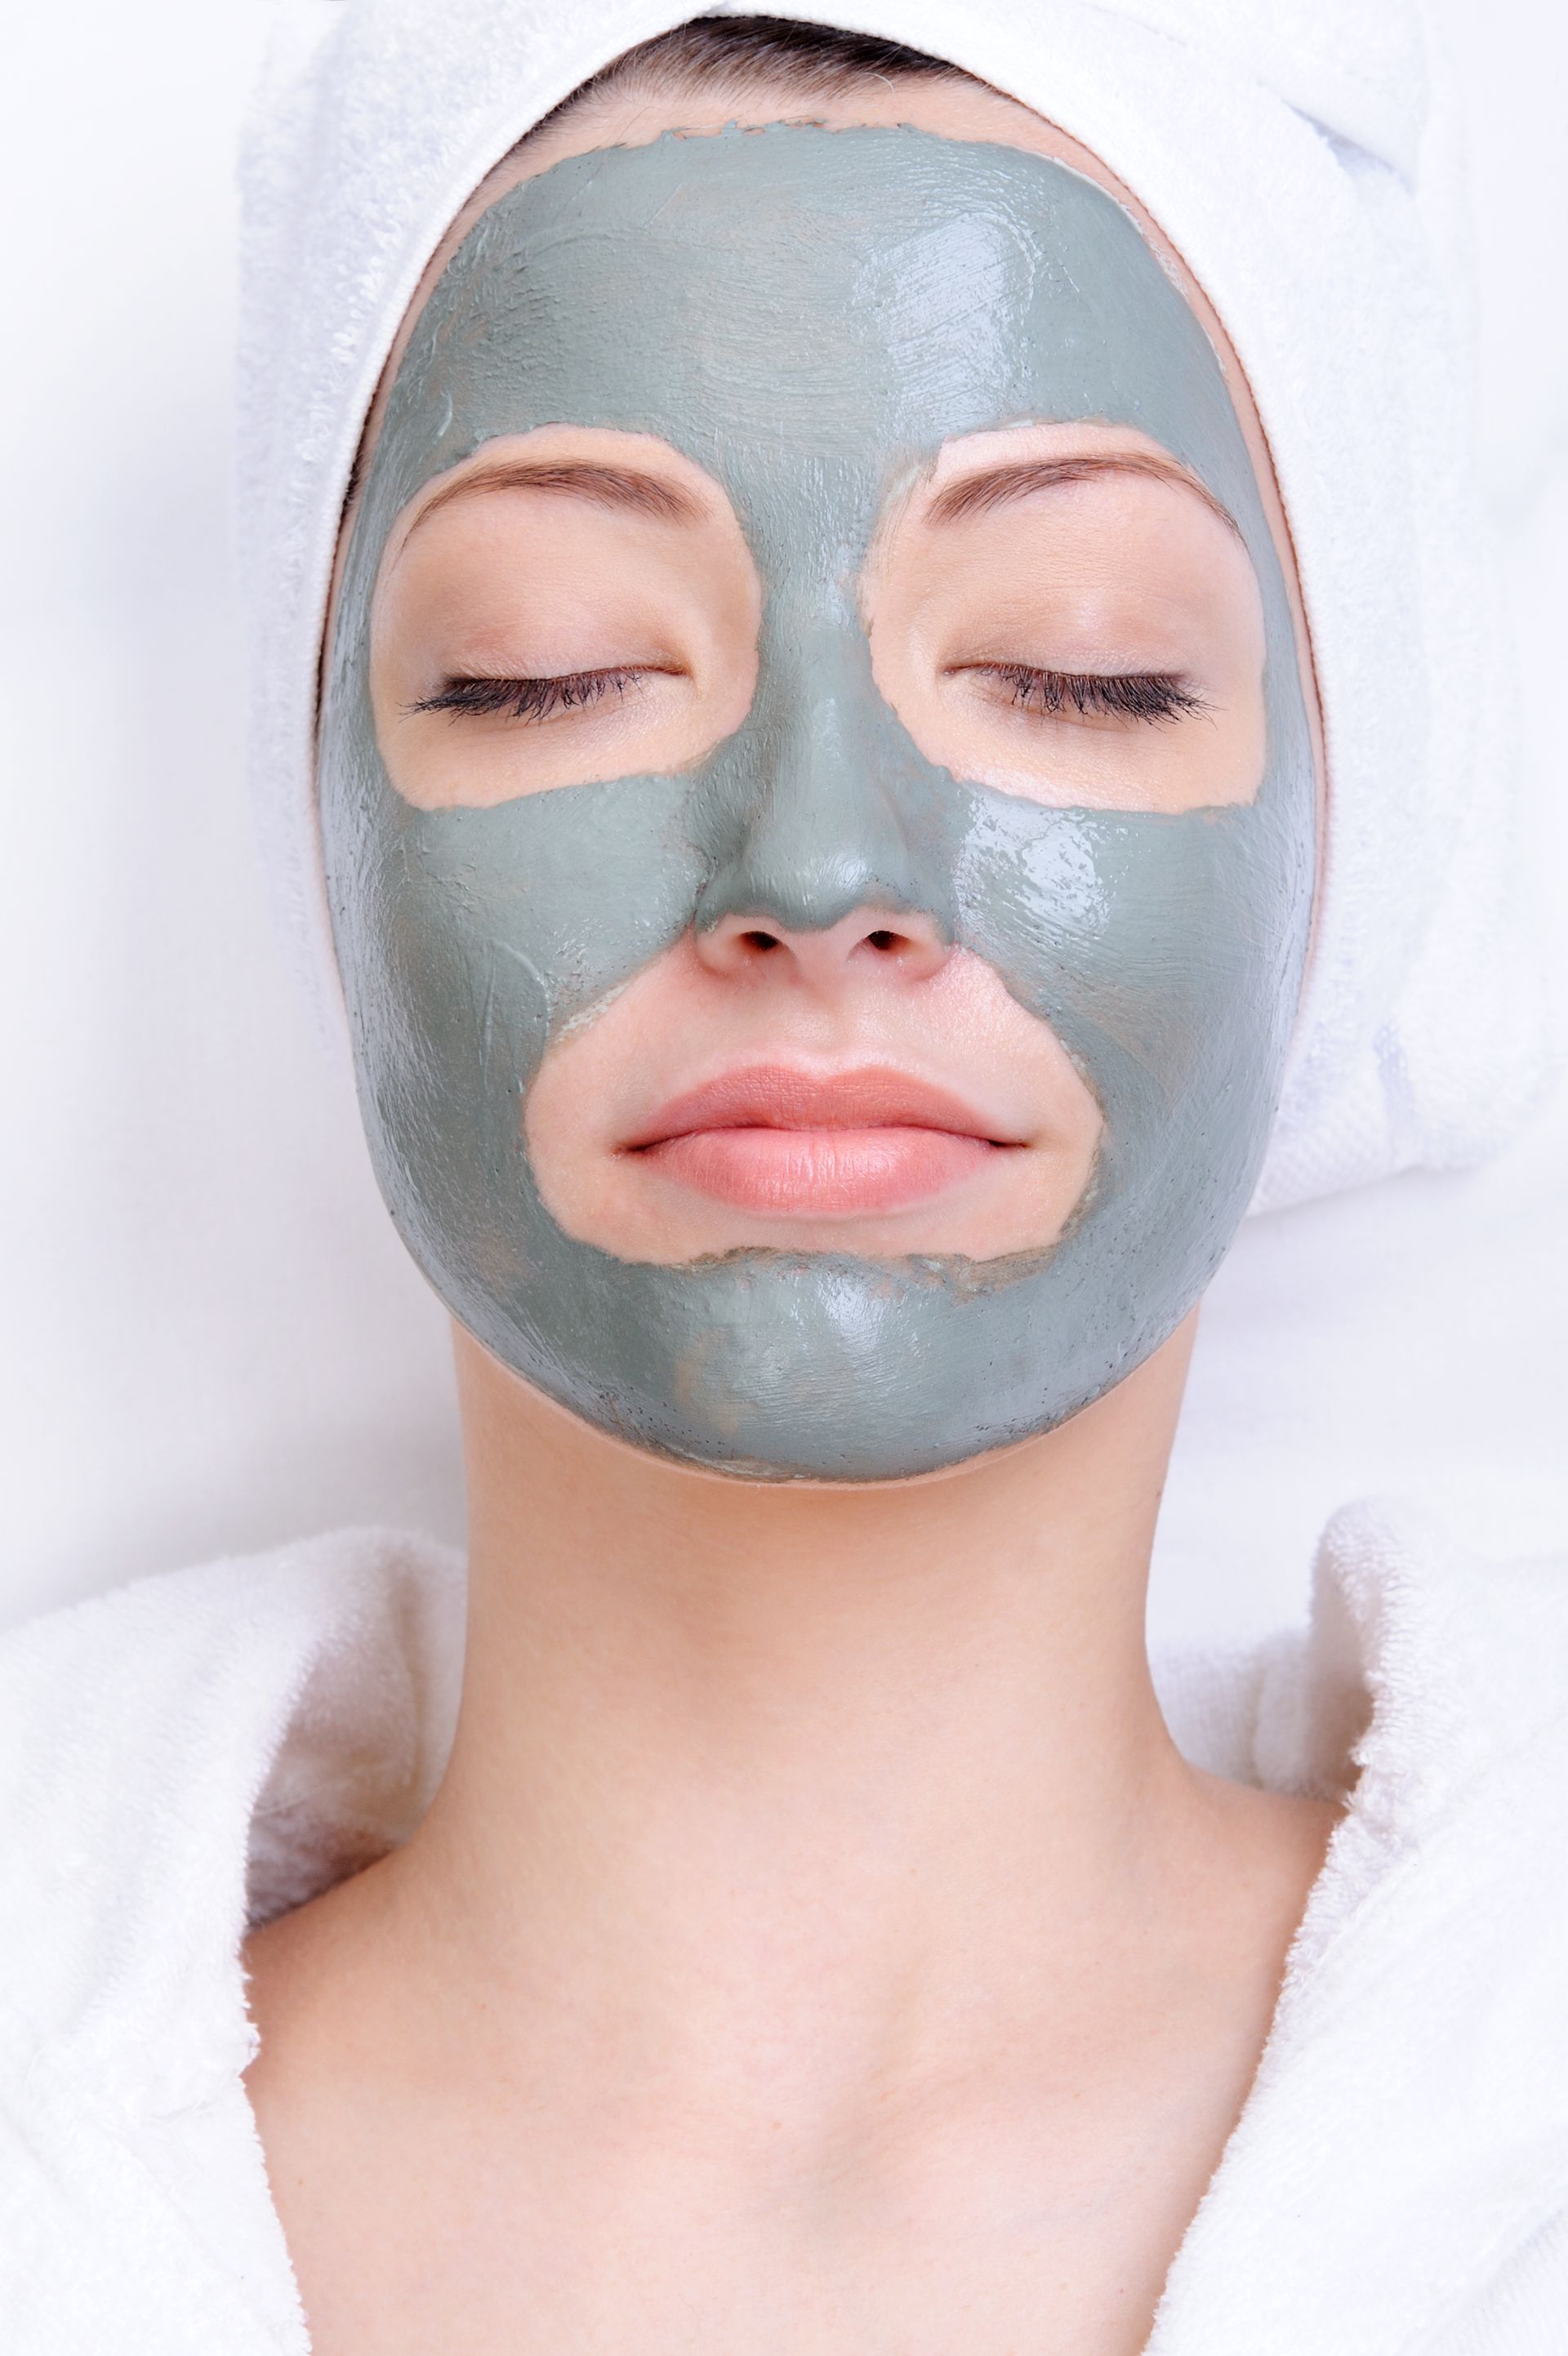 A woman is wearing a clay mask on her face.